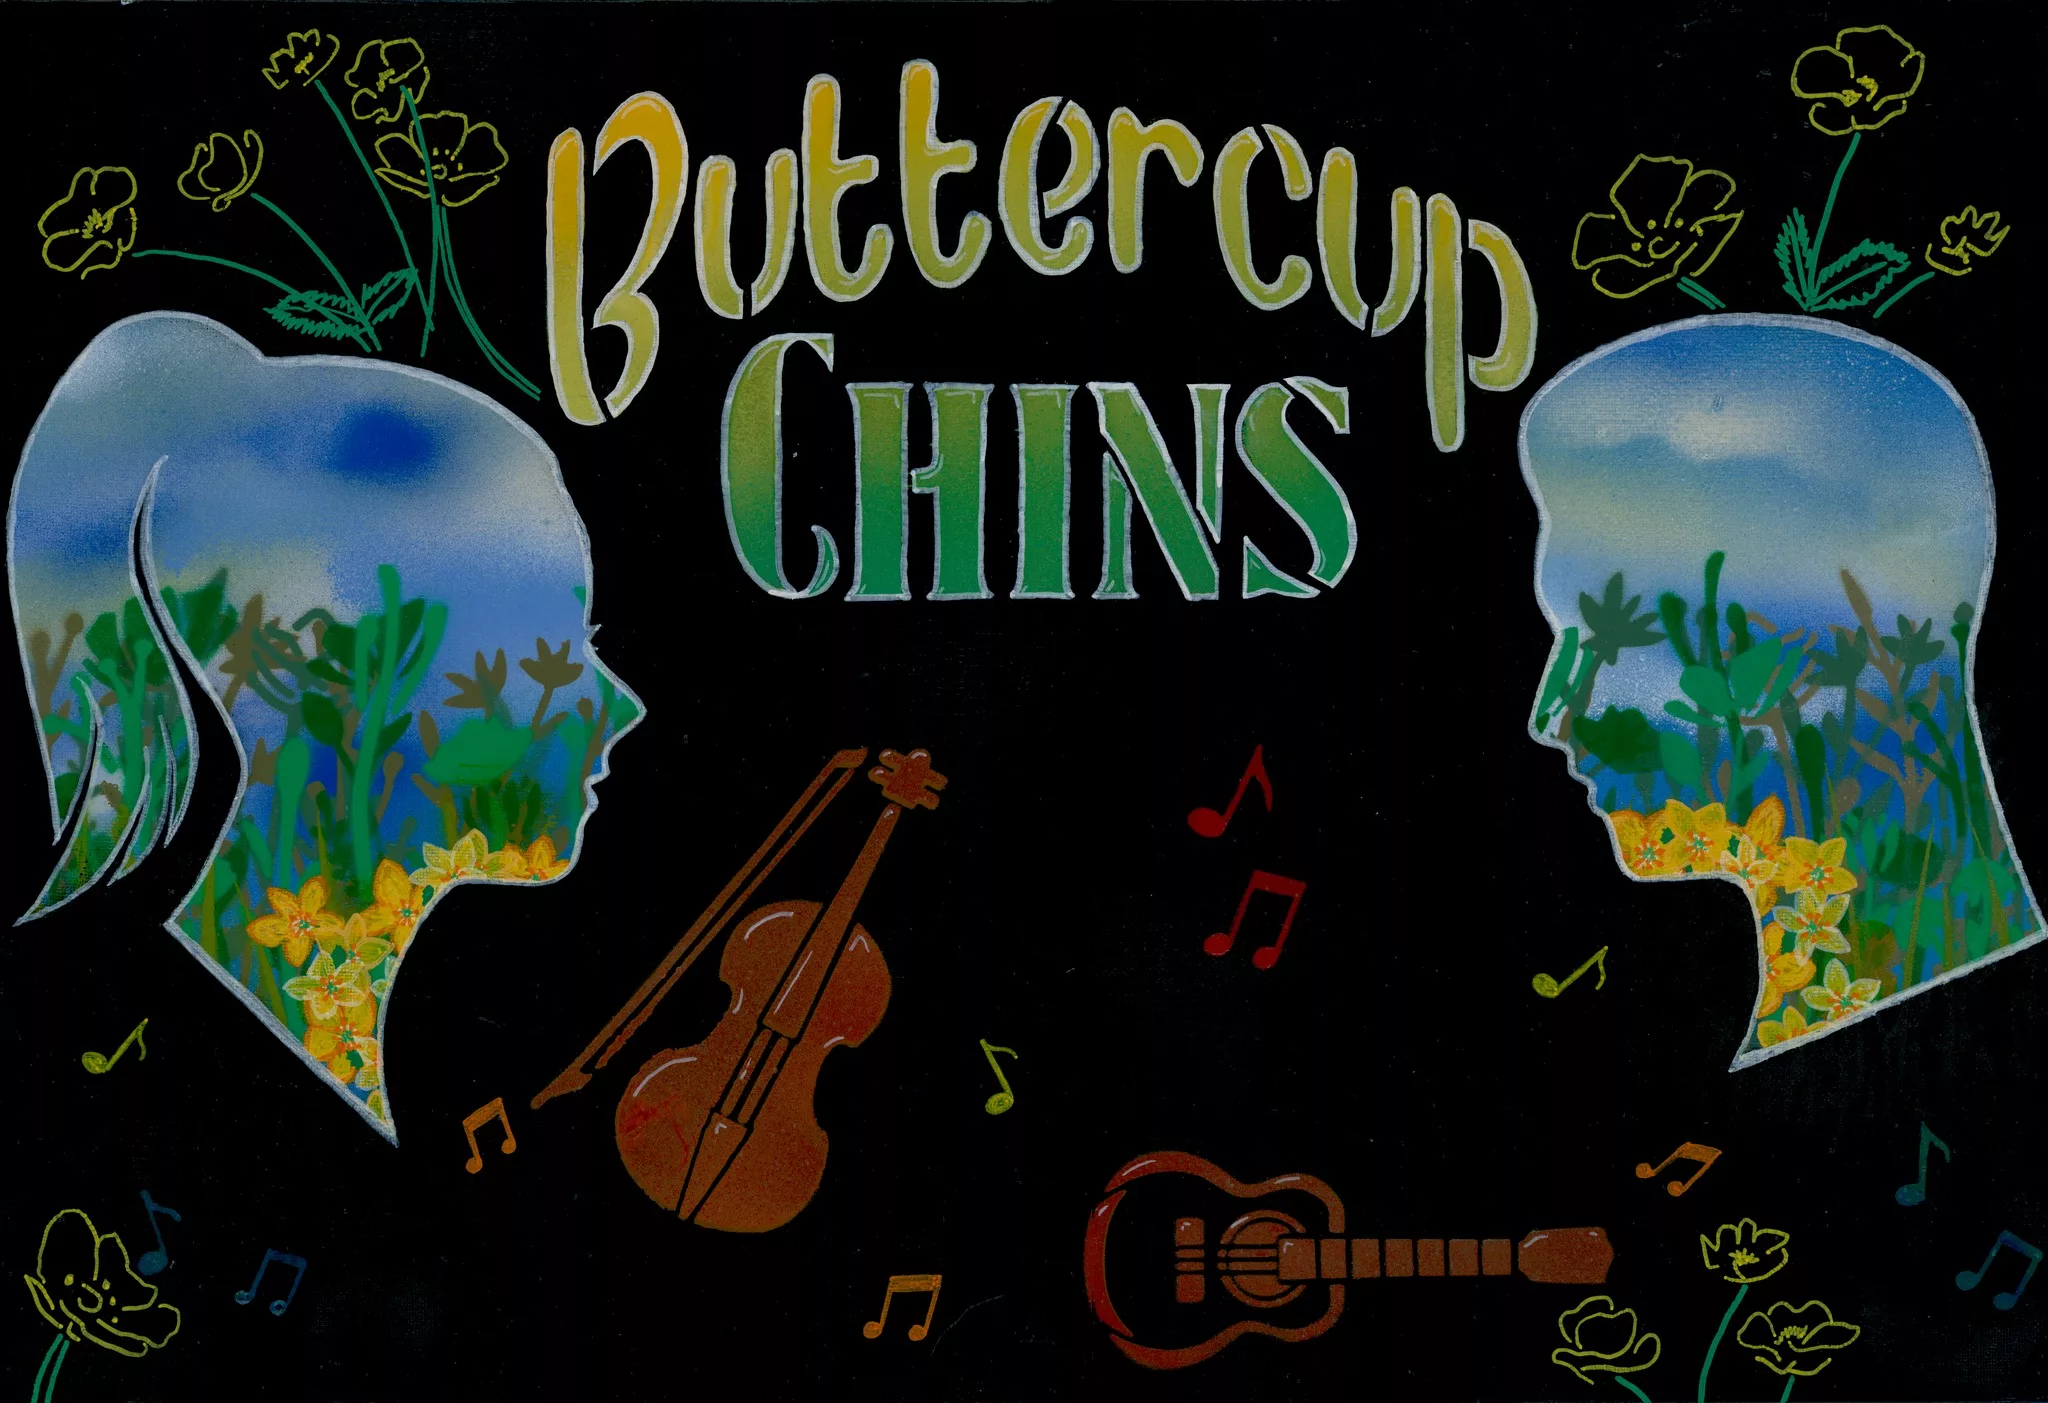 Buttercup Chins is a nifty new band out of Apalachin, New York